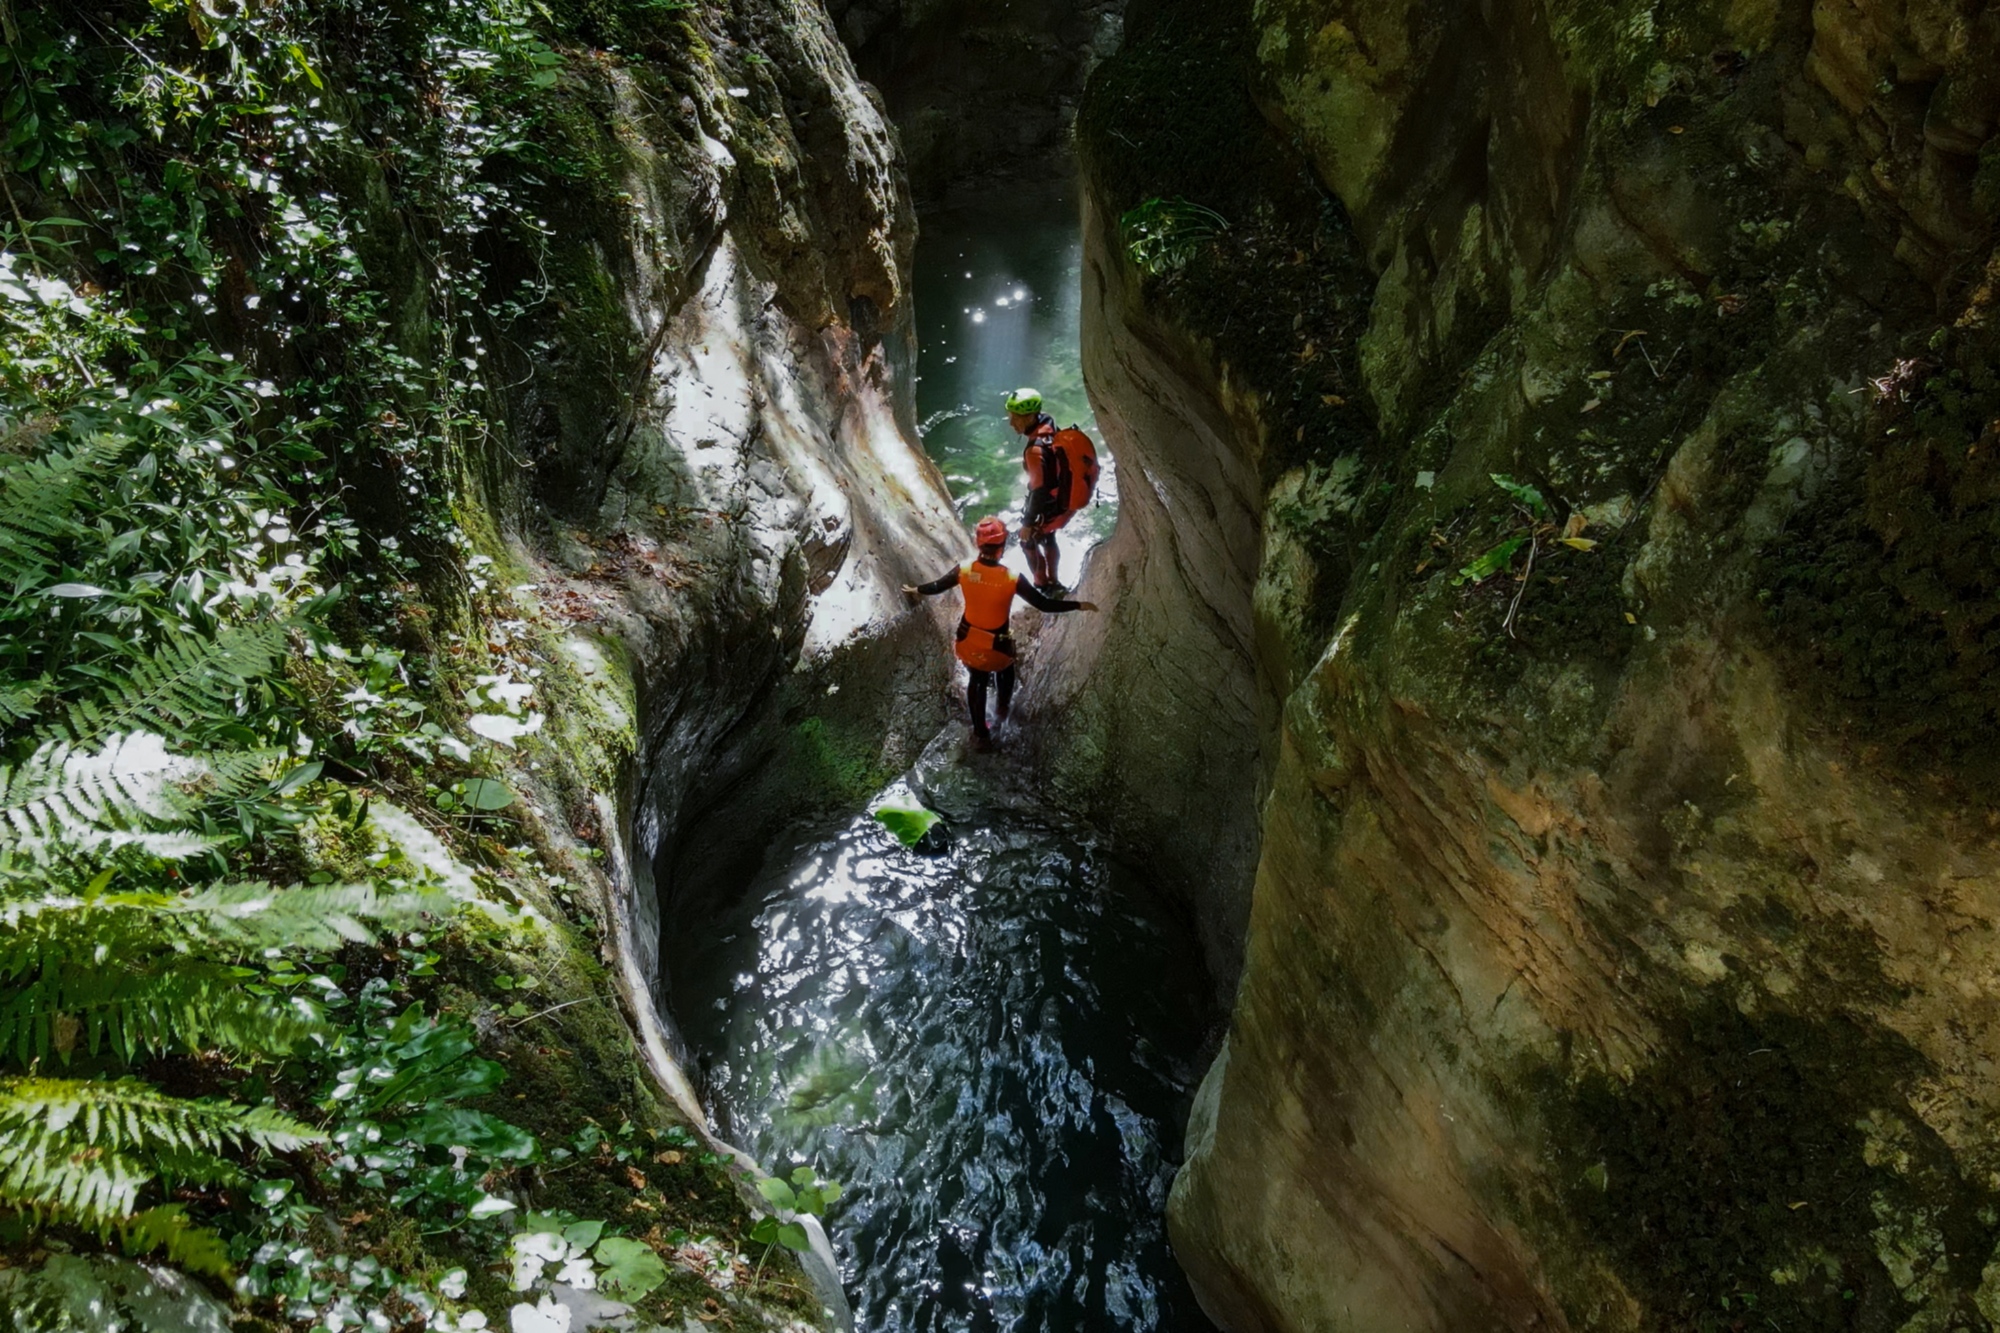 Canyoning in the gorges of Rio Selvano